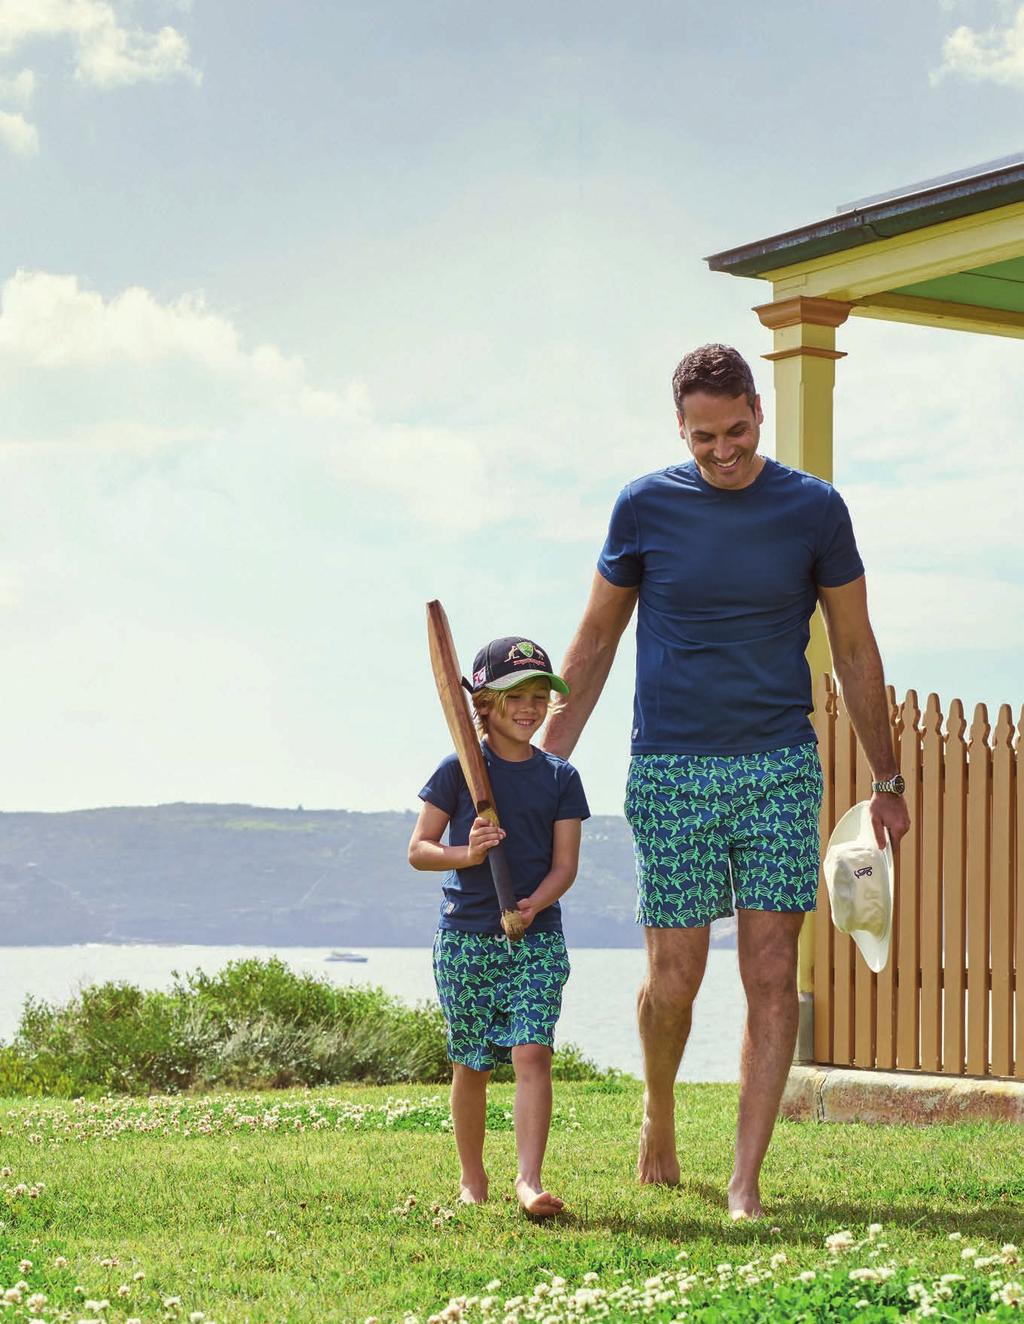 RASH TOPS Sporting a t-shirt-style cut, Tom & Teddy rash tops combine UPF50+ sun protection with a flattering fit.